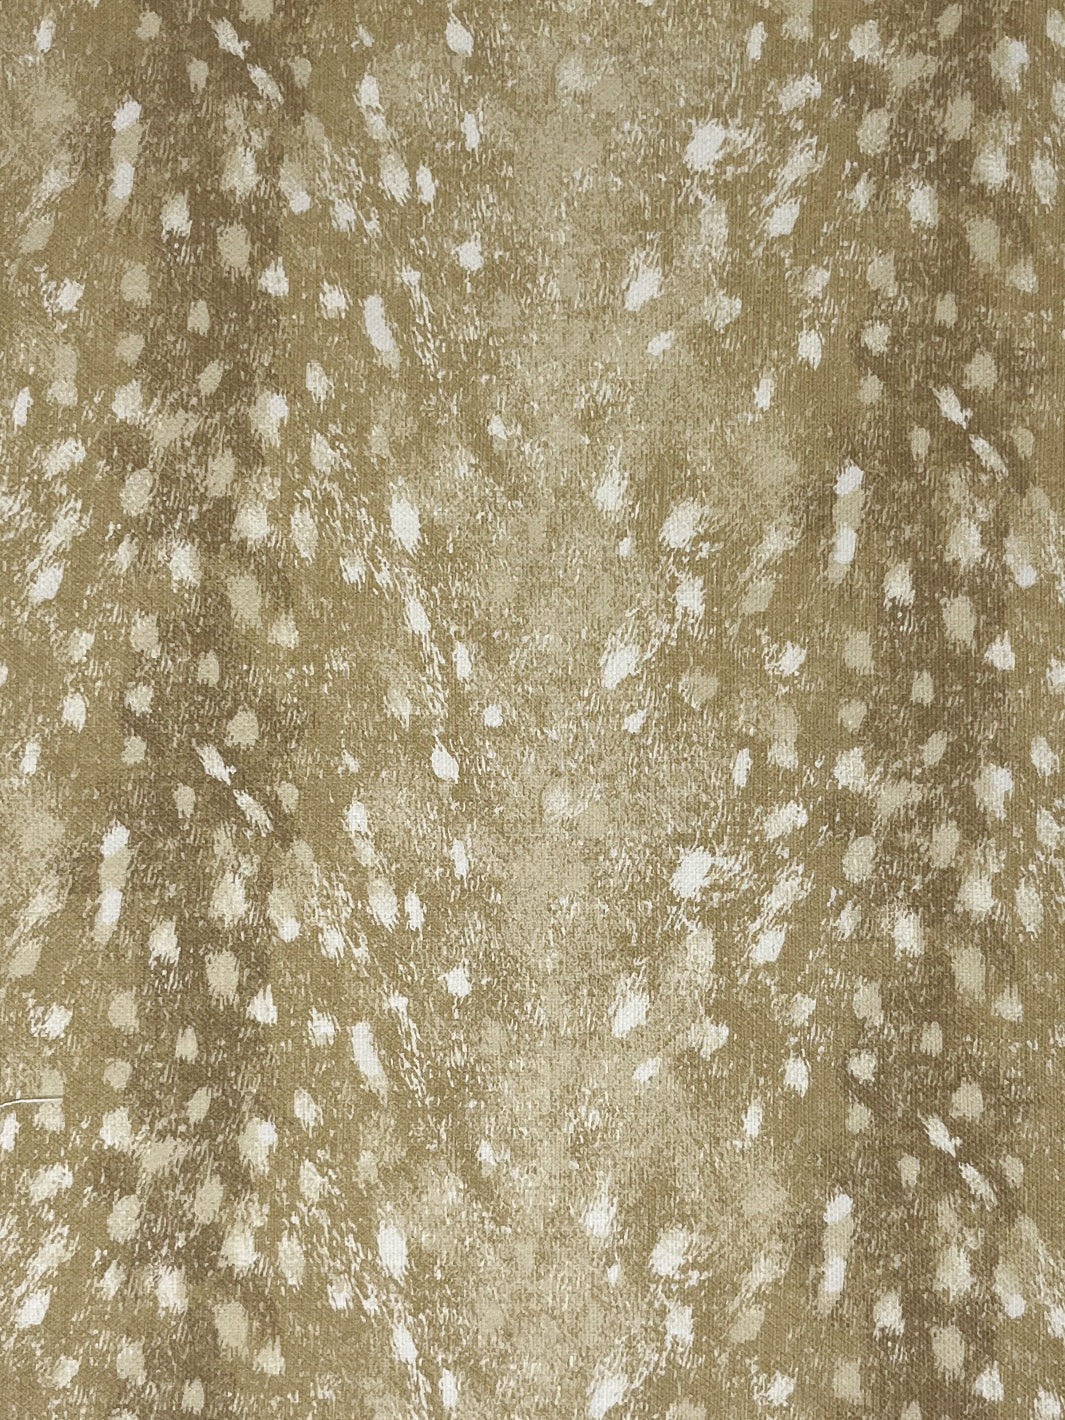 'Deer' Linen Fabric by Nathan Turner - Gold